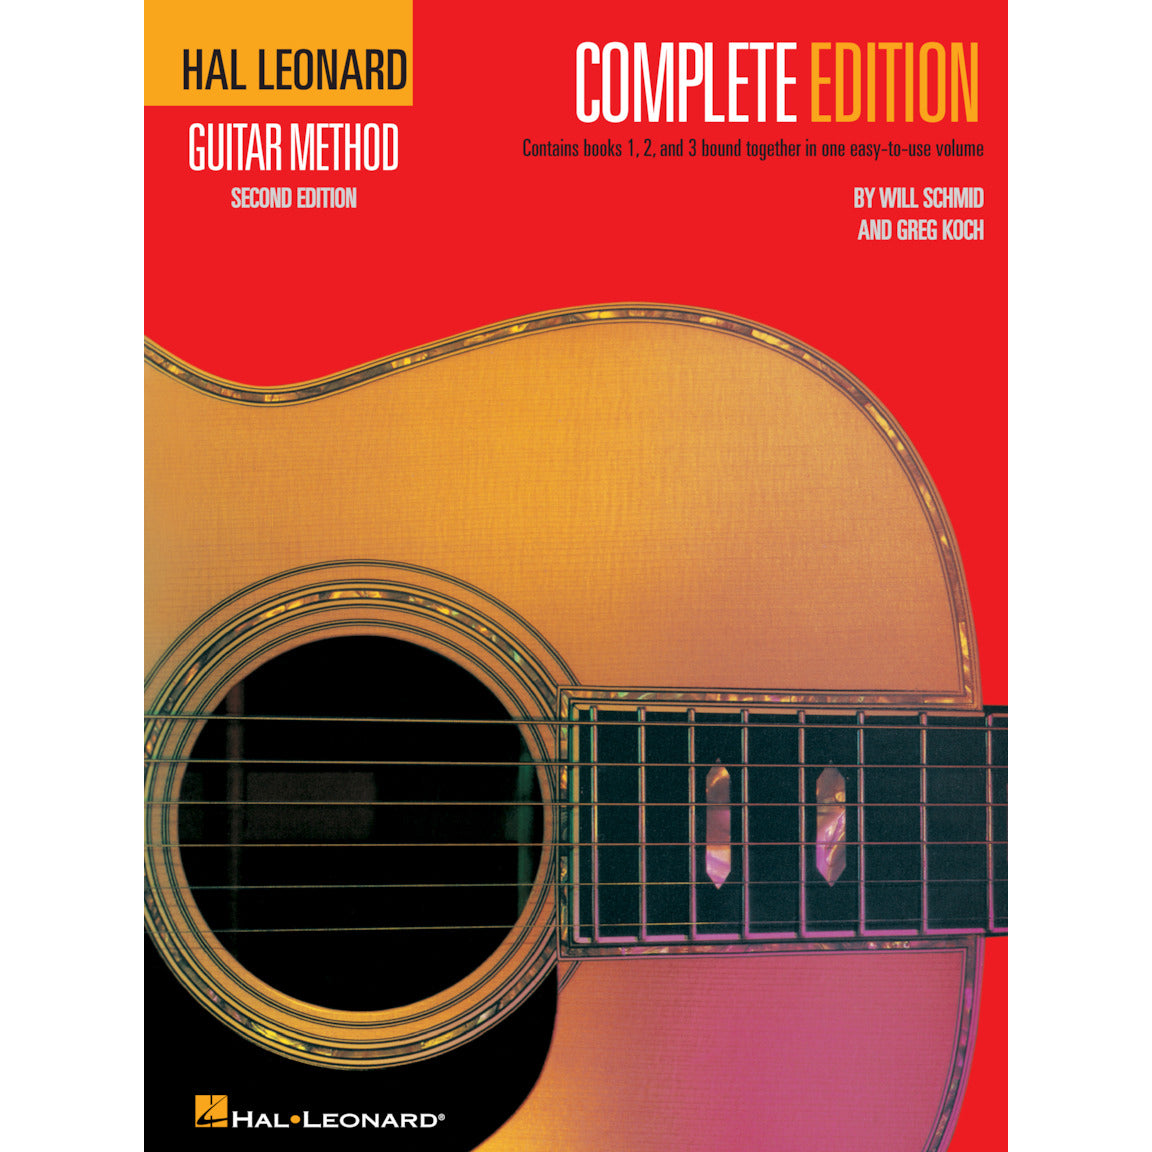 Hal Leonard Guitar Method Complete Edition, Book Only (No Audio) 2nd Edition